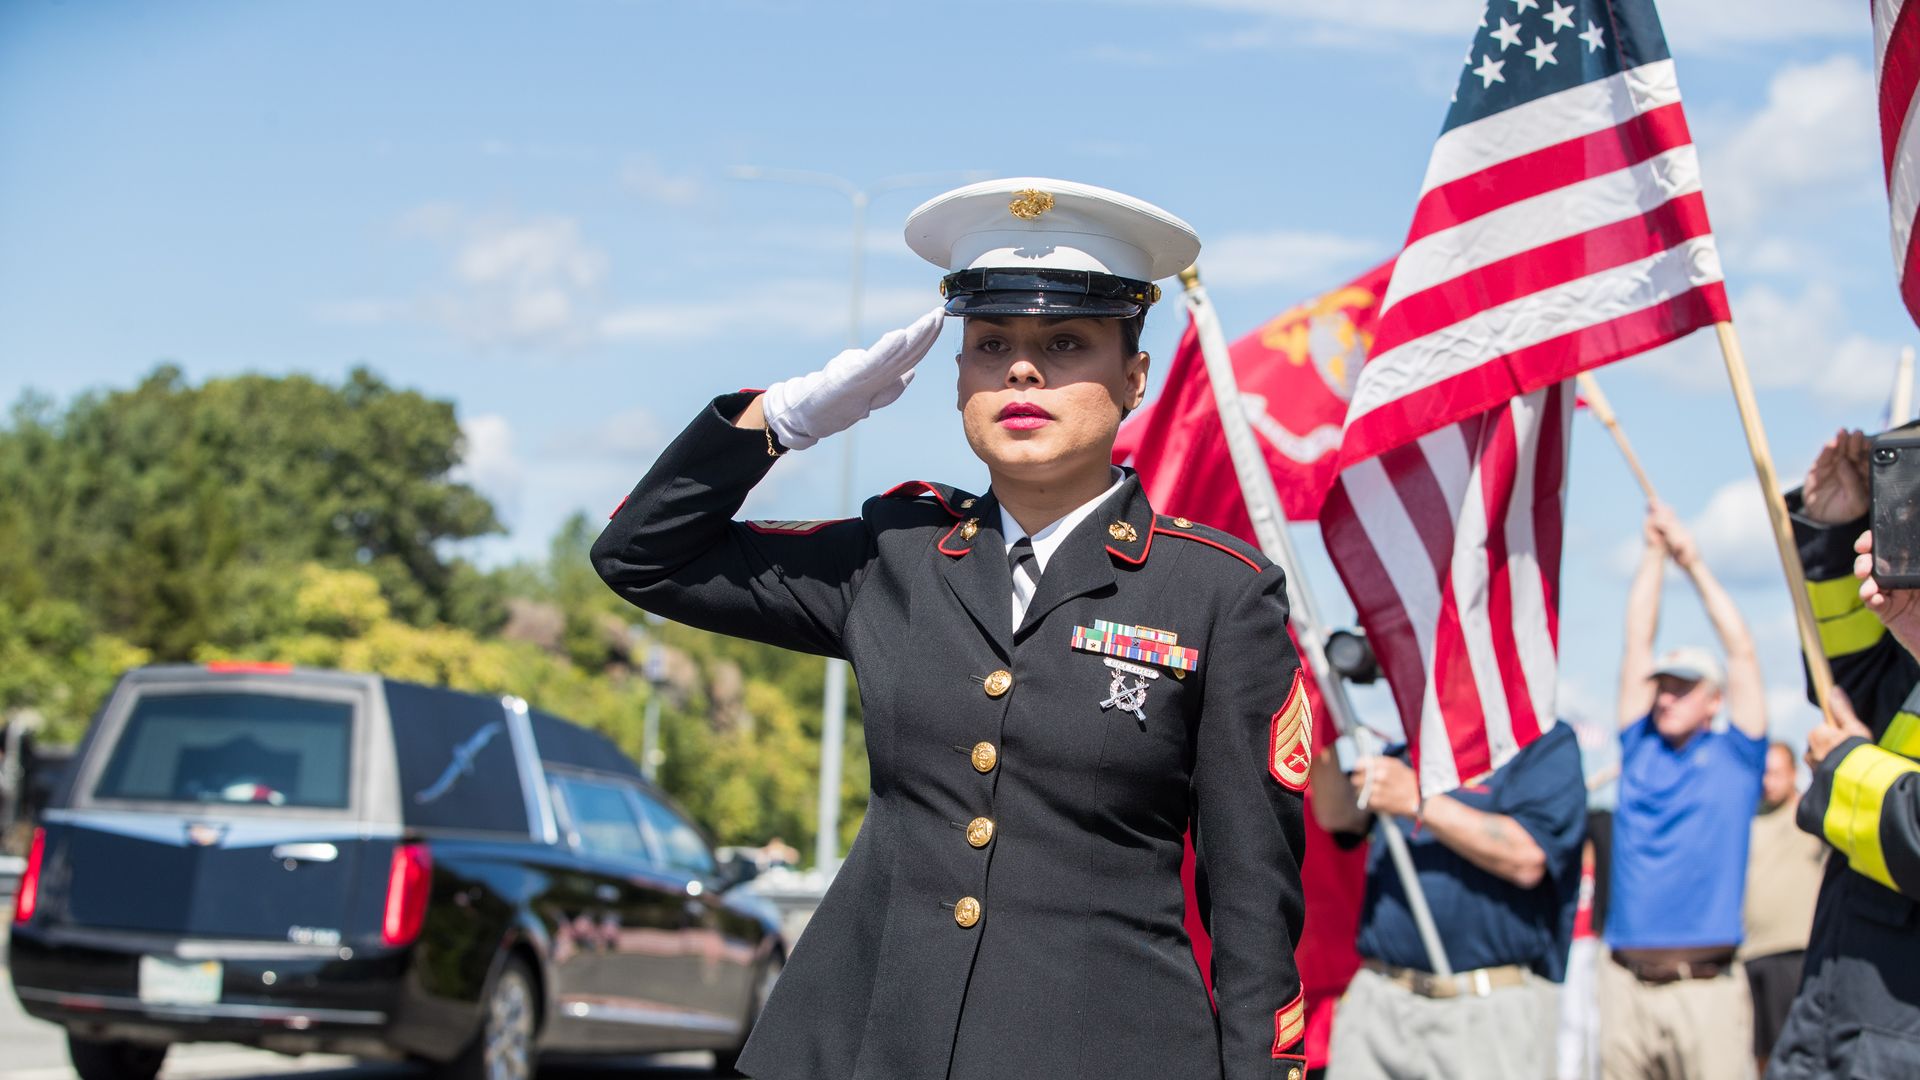 U.S. Marine Ssgt. Alice Ward stands at attention on the side of I-93 North as the hearse carrying fallen Marine Sgt. Johanny Rosario Pichardo passes on September 11